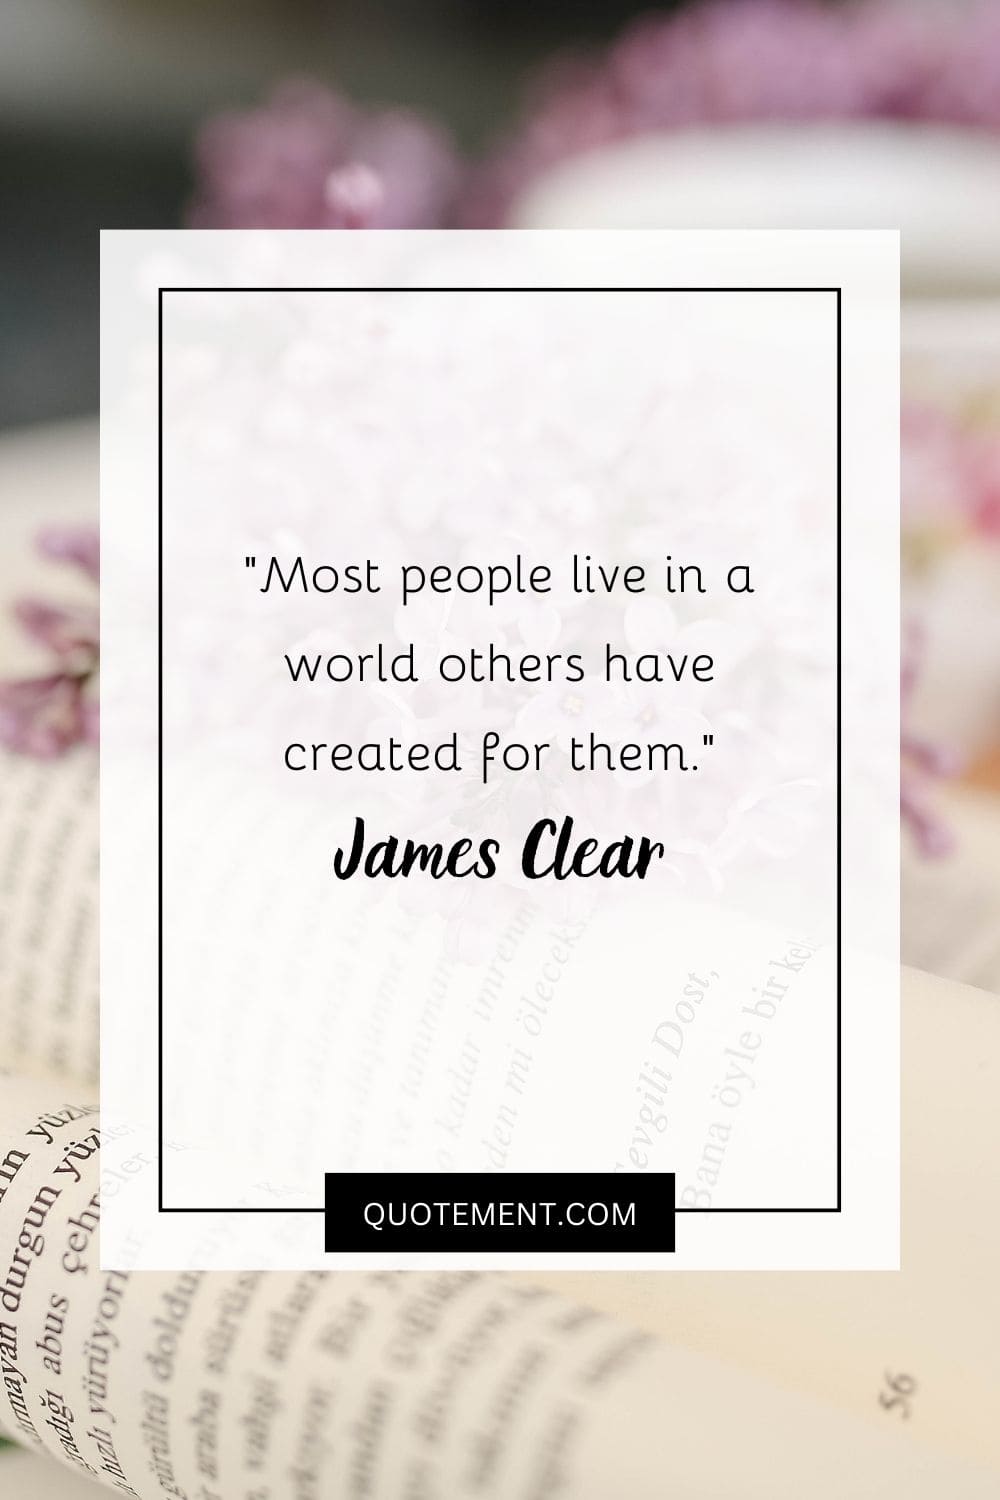 Most people live in a world others have created for them.